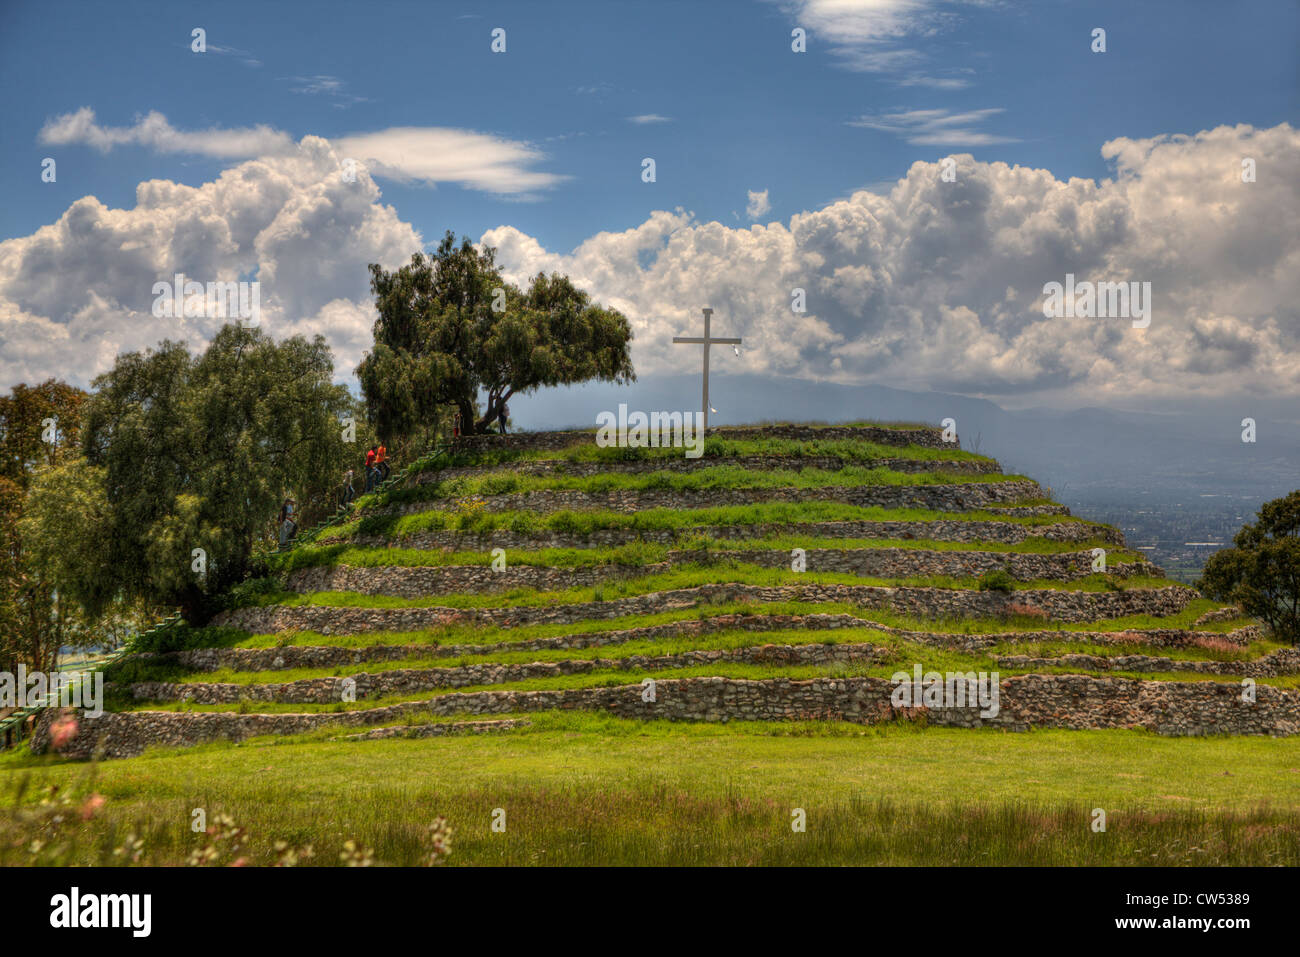 Spiral Pyramid - Xochitecatl archaeological site in the state of Tlaxcala, Mexico Stock Photo